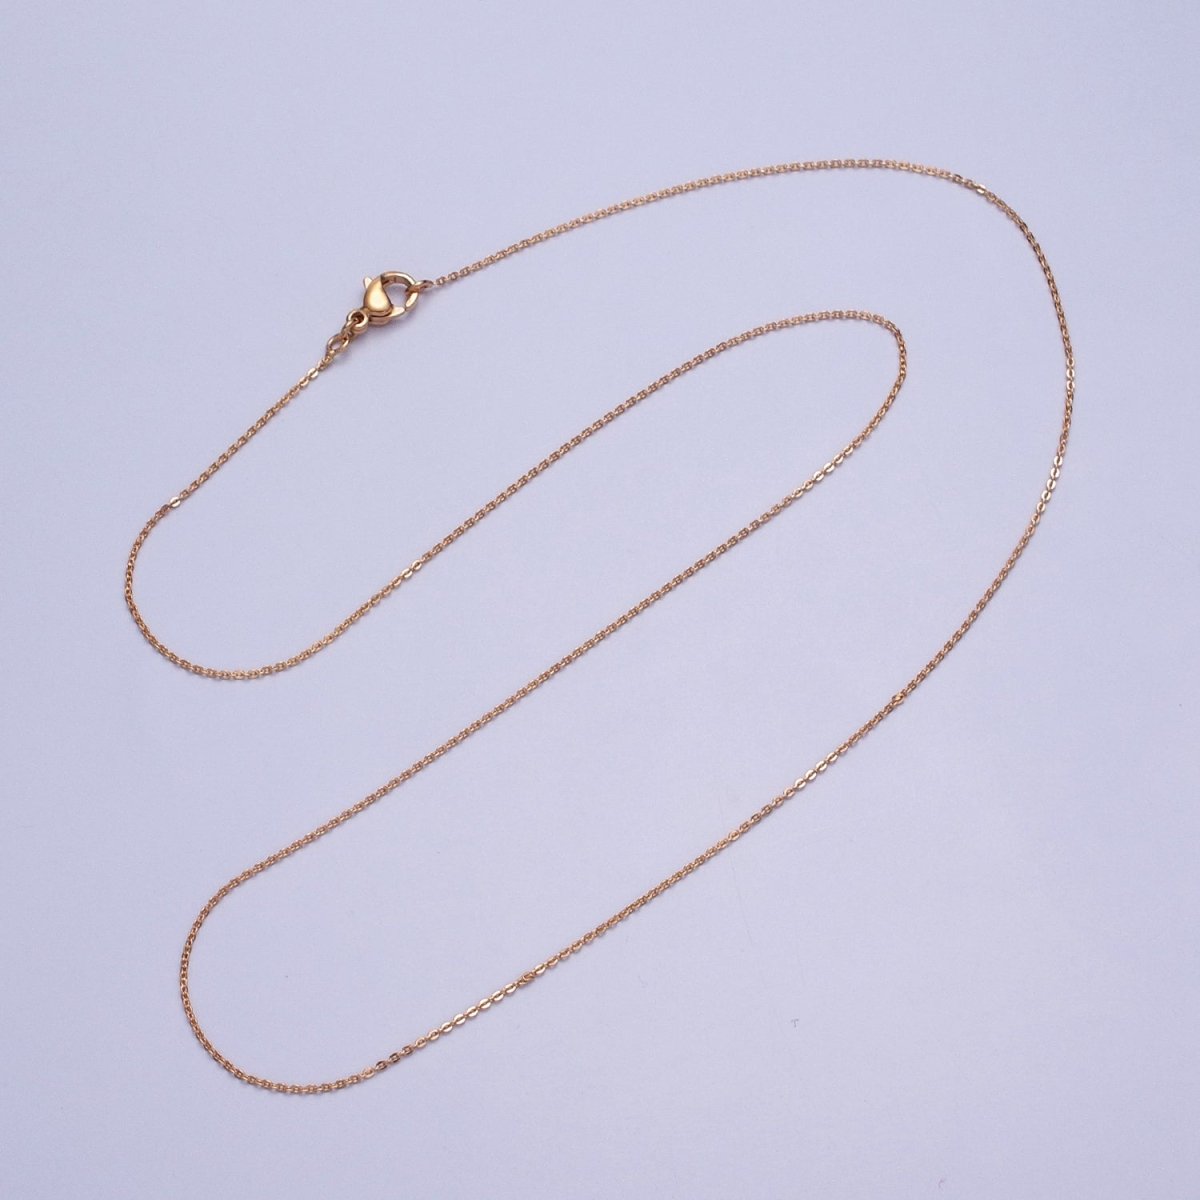 19.5'' Ready to Use 18K Gold Filled Thin Rolo Necklace Chain Layering Cable Chain Dainty Necklace For Pendant Charm Necklace Making | WA-1605 Clearance Pricing - DLUXCA